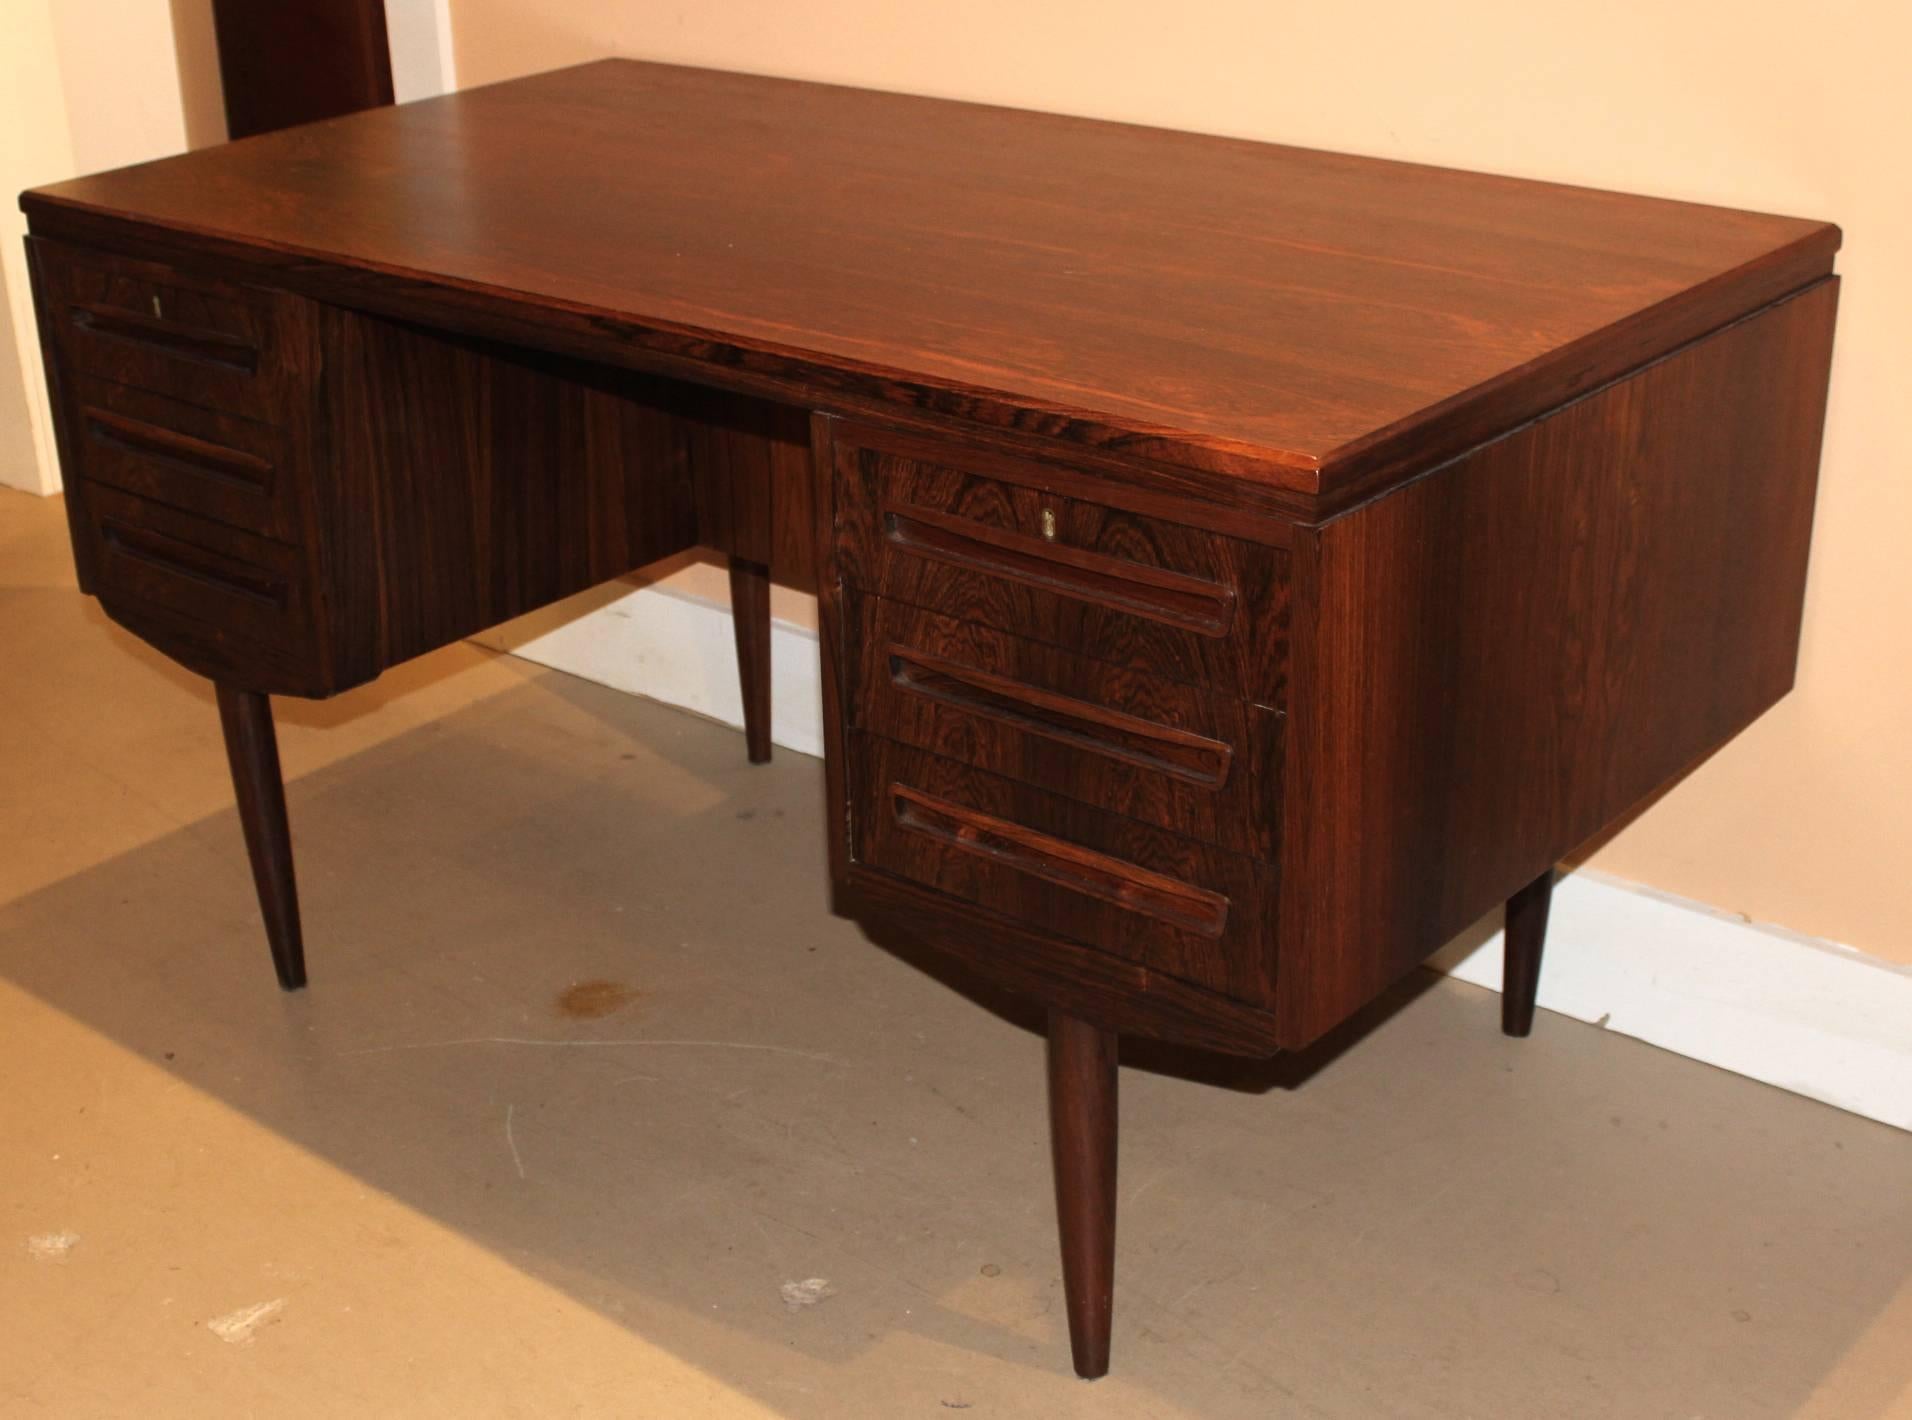 Danish Mid-Century Modern Brazilian rosewood desk with bar. The top of this desk features a beautiful slab of rosewood with active cathedral grain patterns. Two banks of three drawers sit on either side of the kneehole. A finished back with